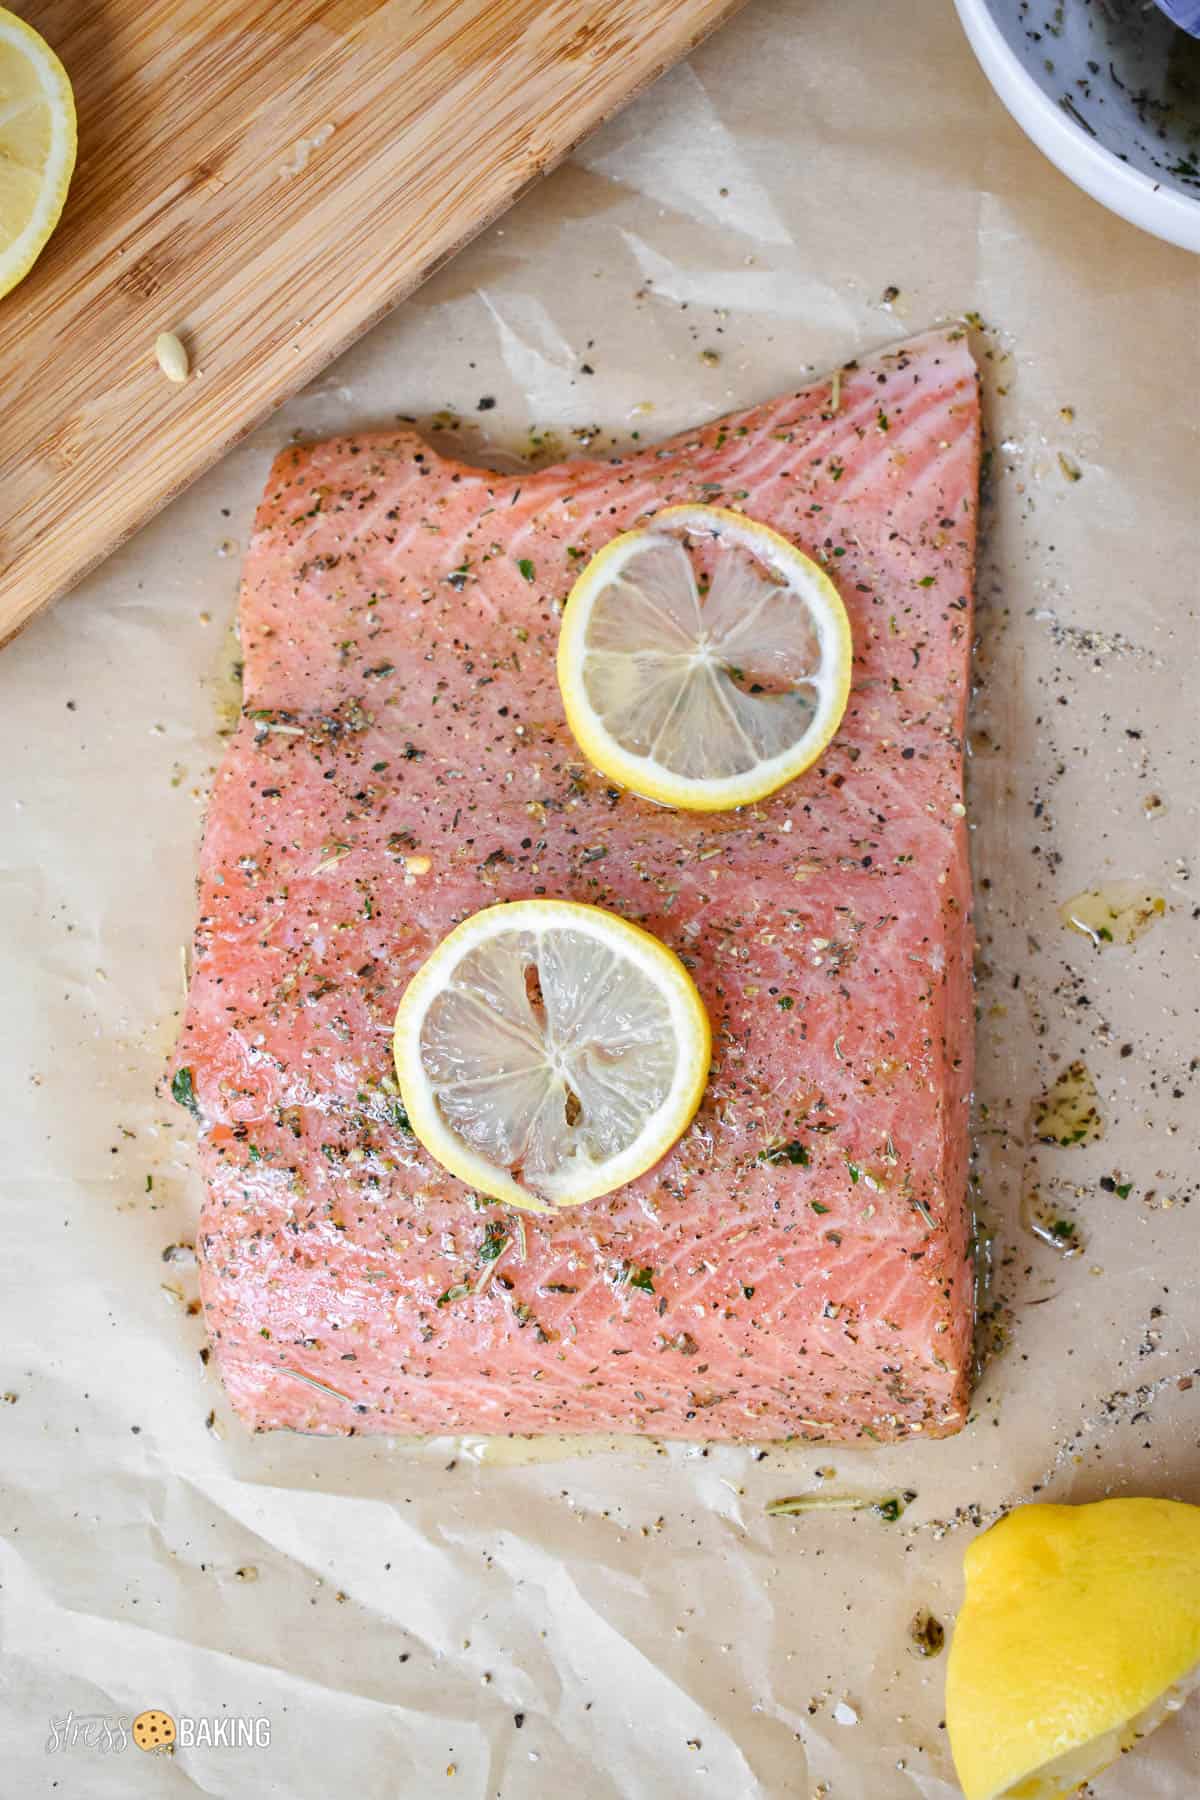 Pink raw salmon filet on parchment paper coated in spices and lemon slices